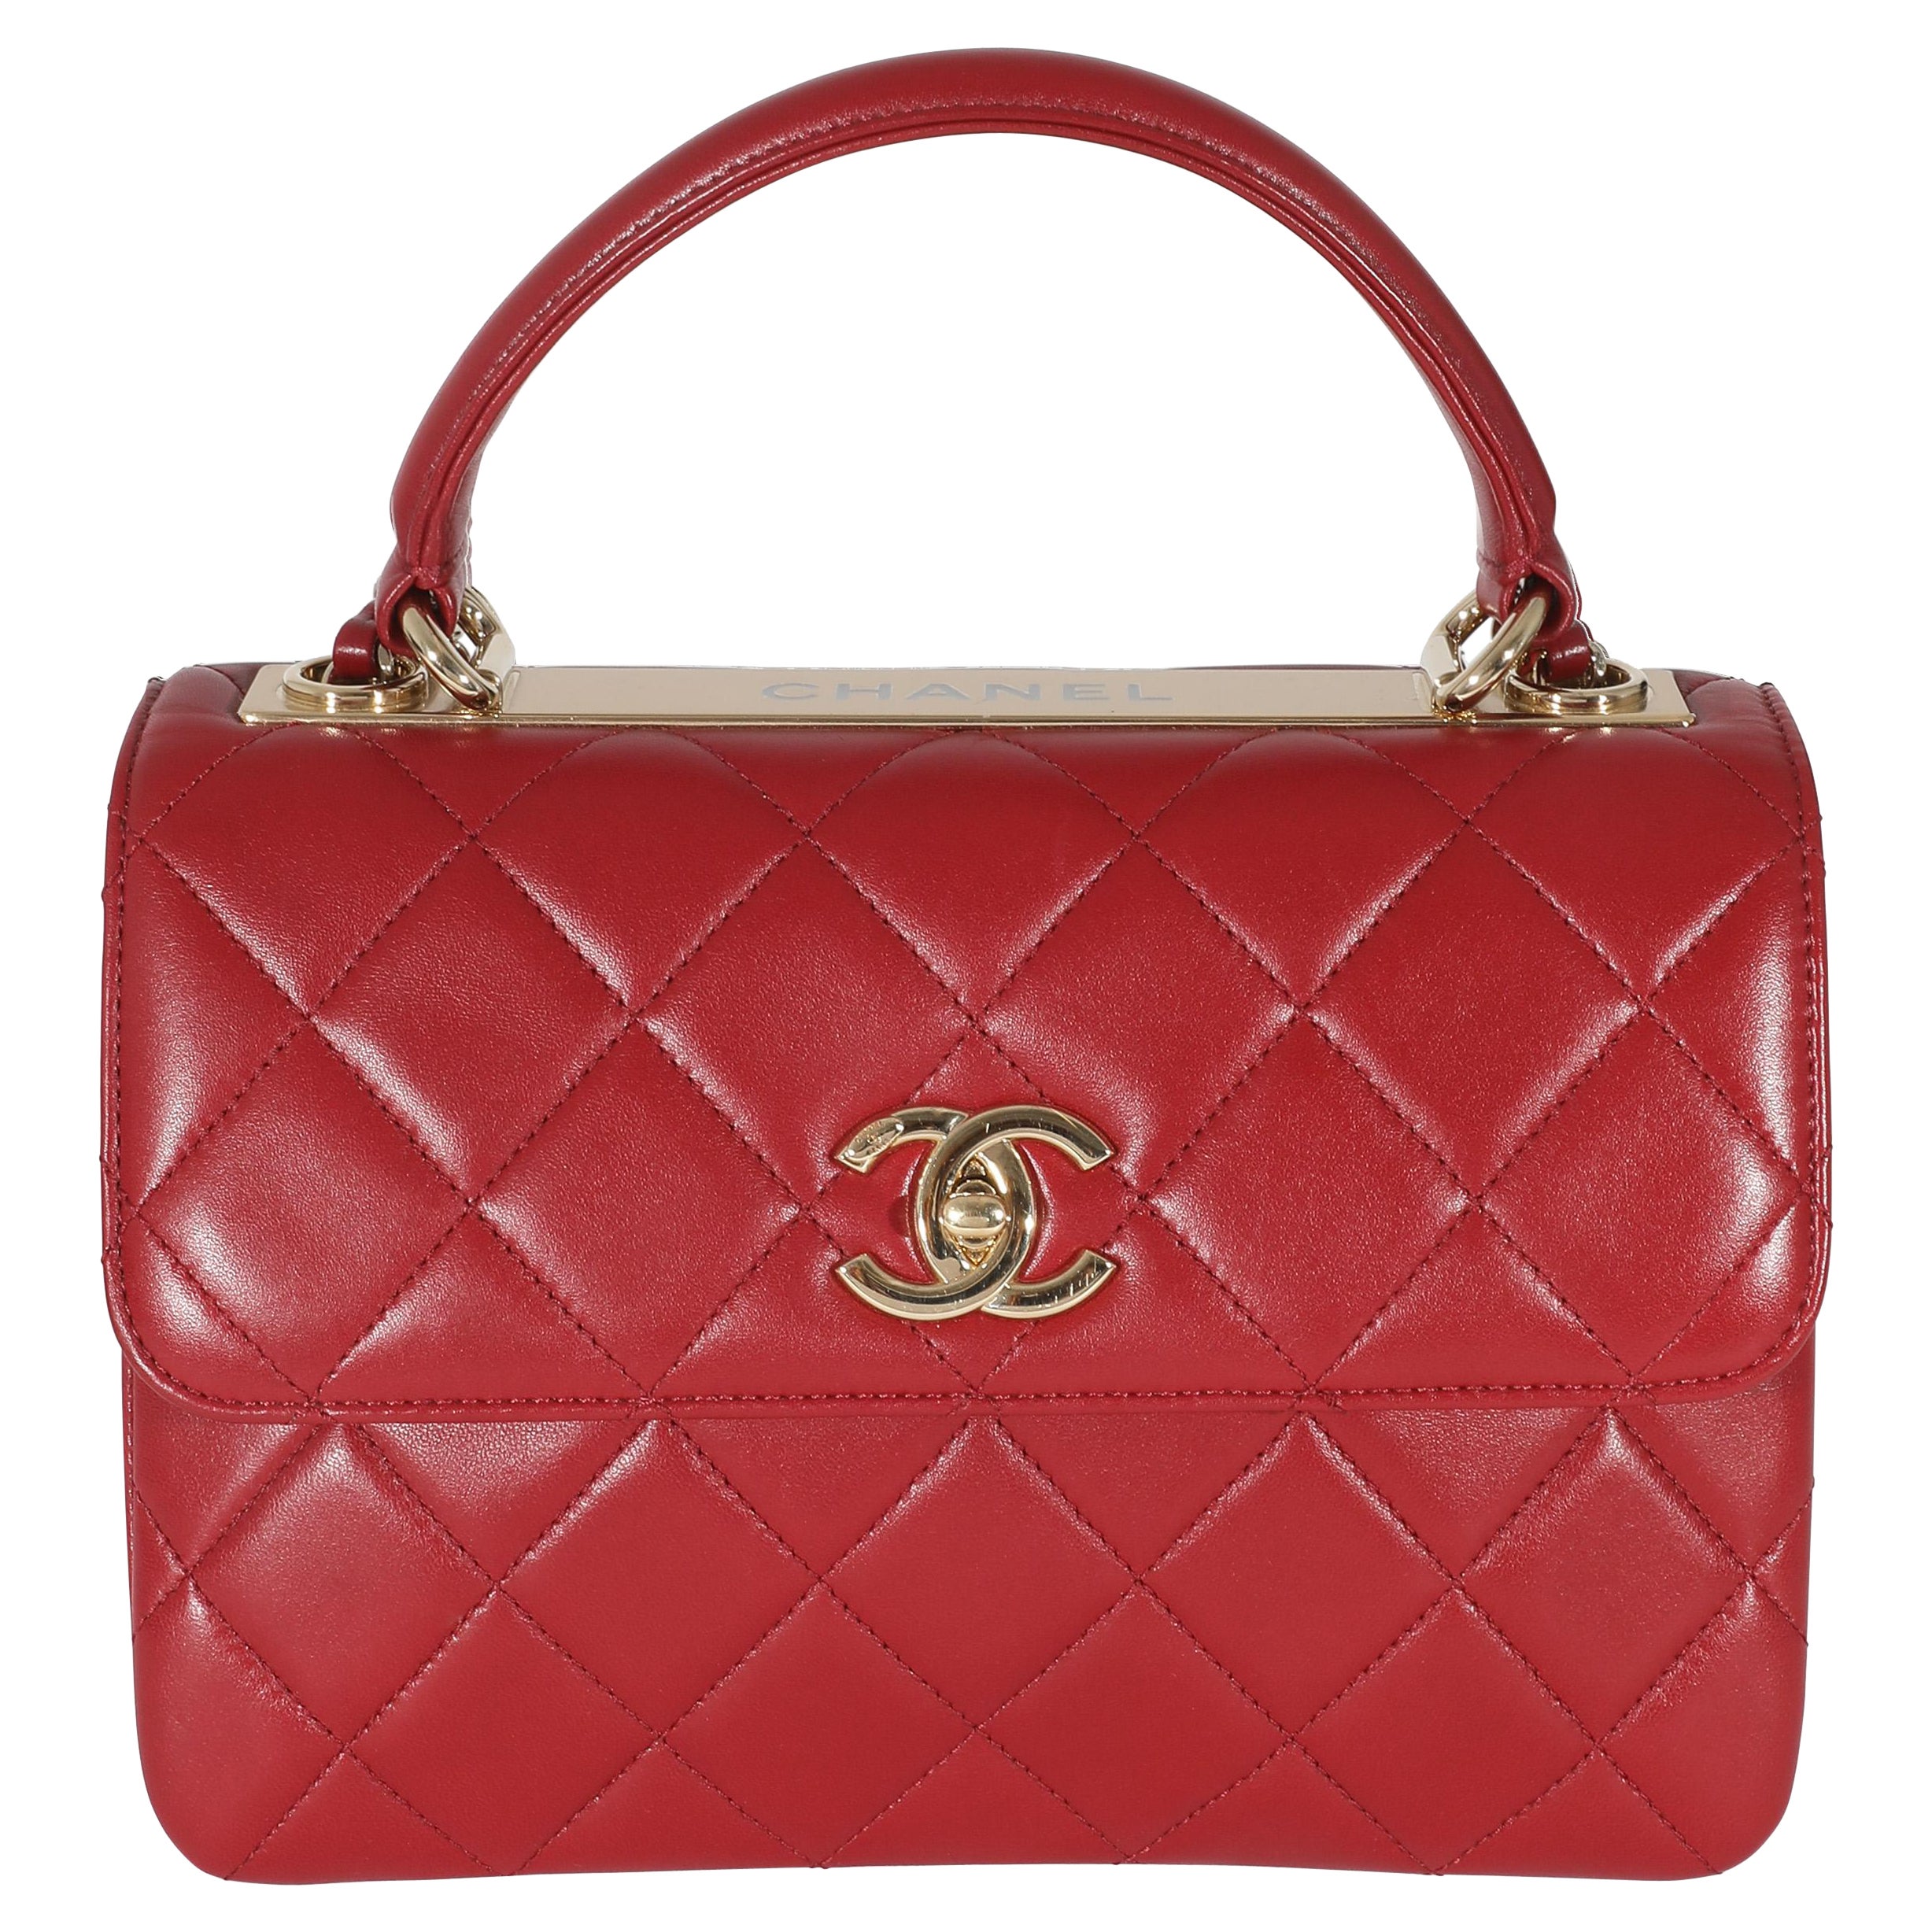 Chanel Burgandy Quilted Lambskin Small Trendy Flap Bag